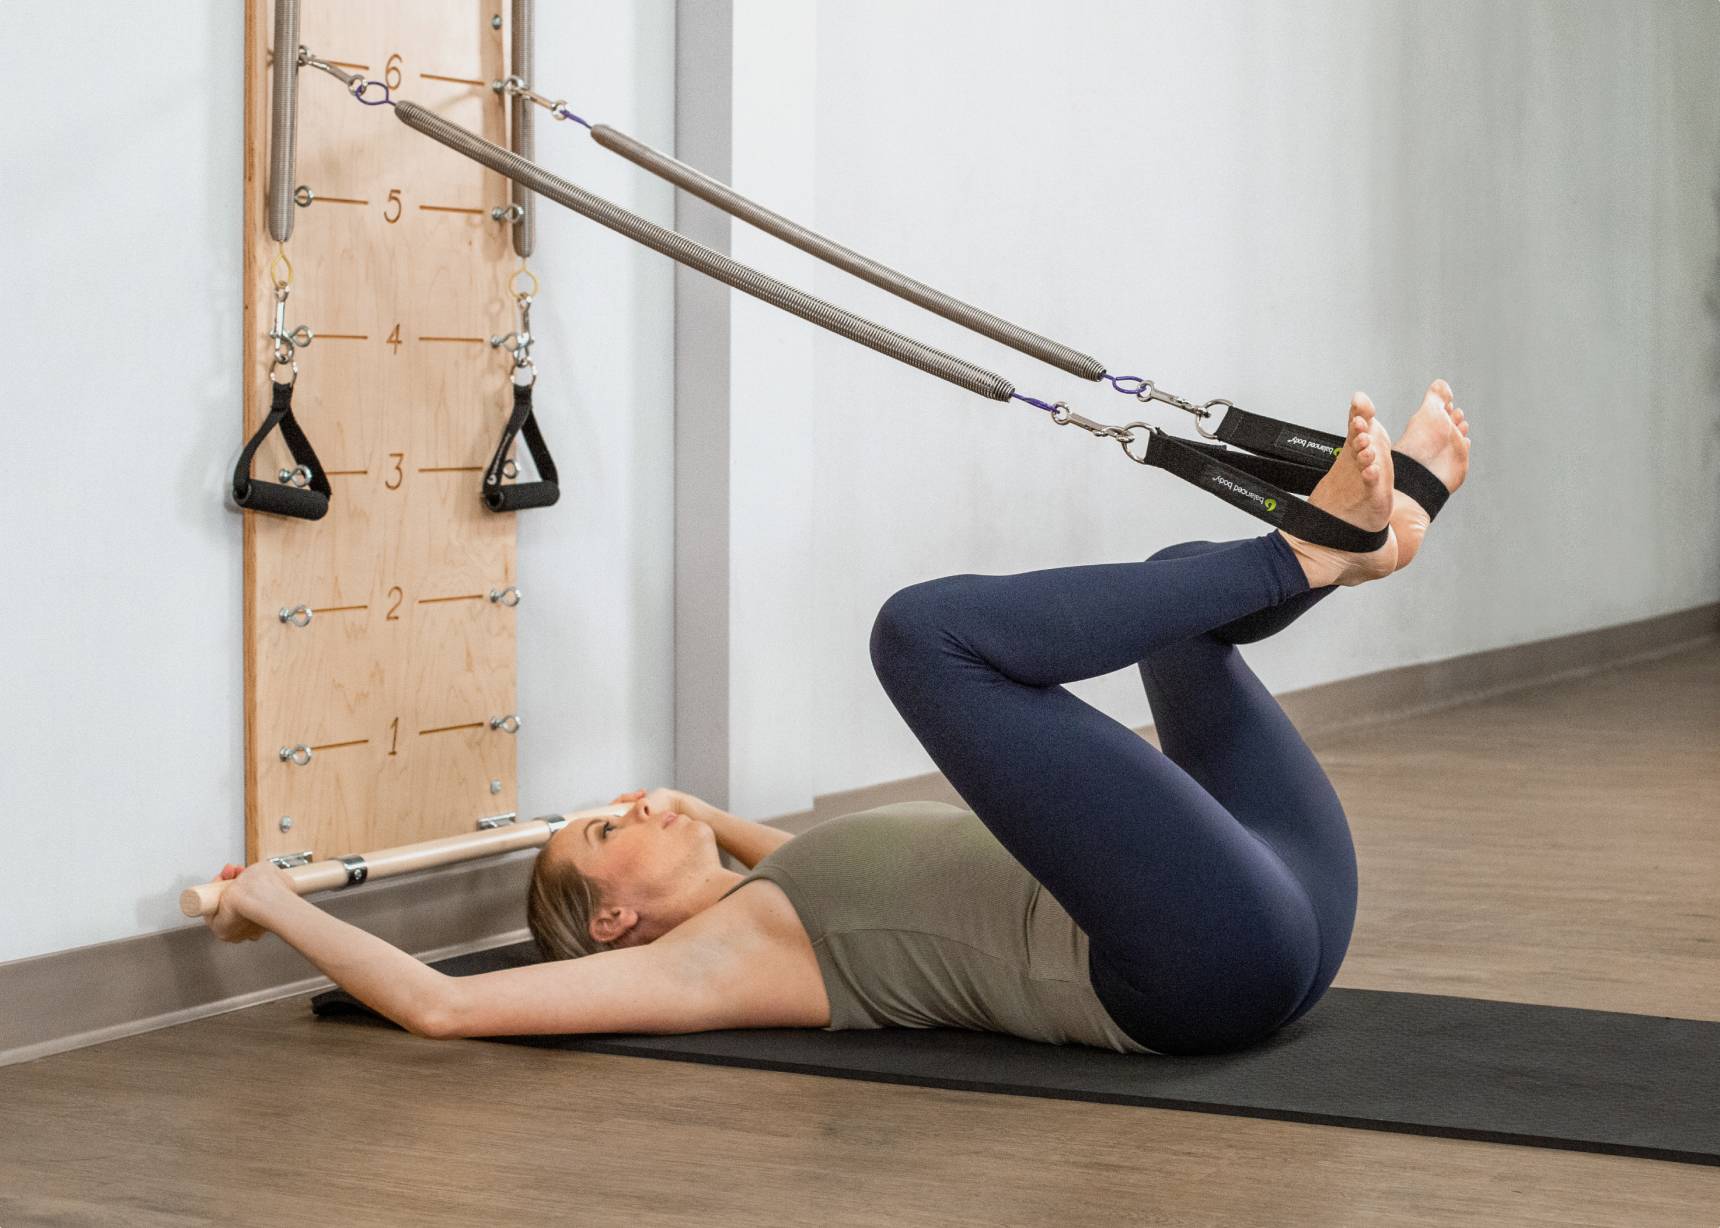 Pilates Springboard 101: how to teach with resistance in a whole new way